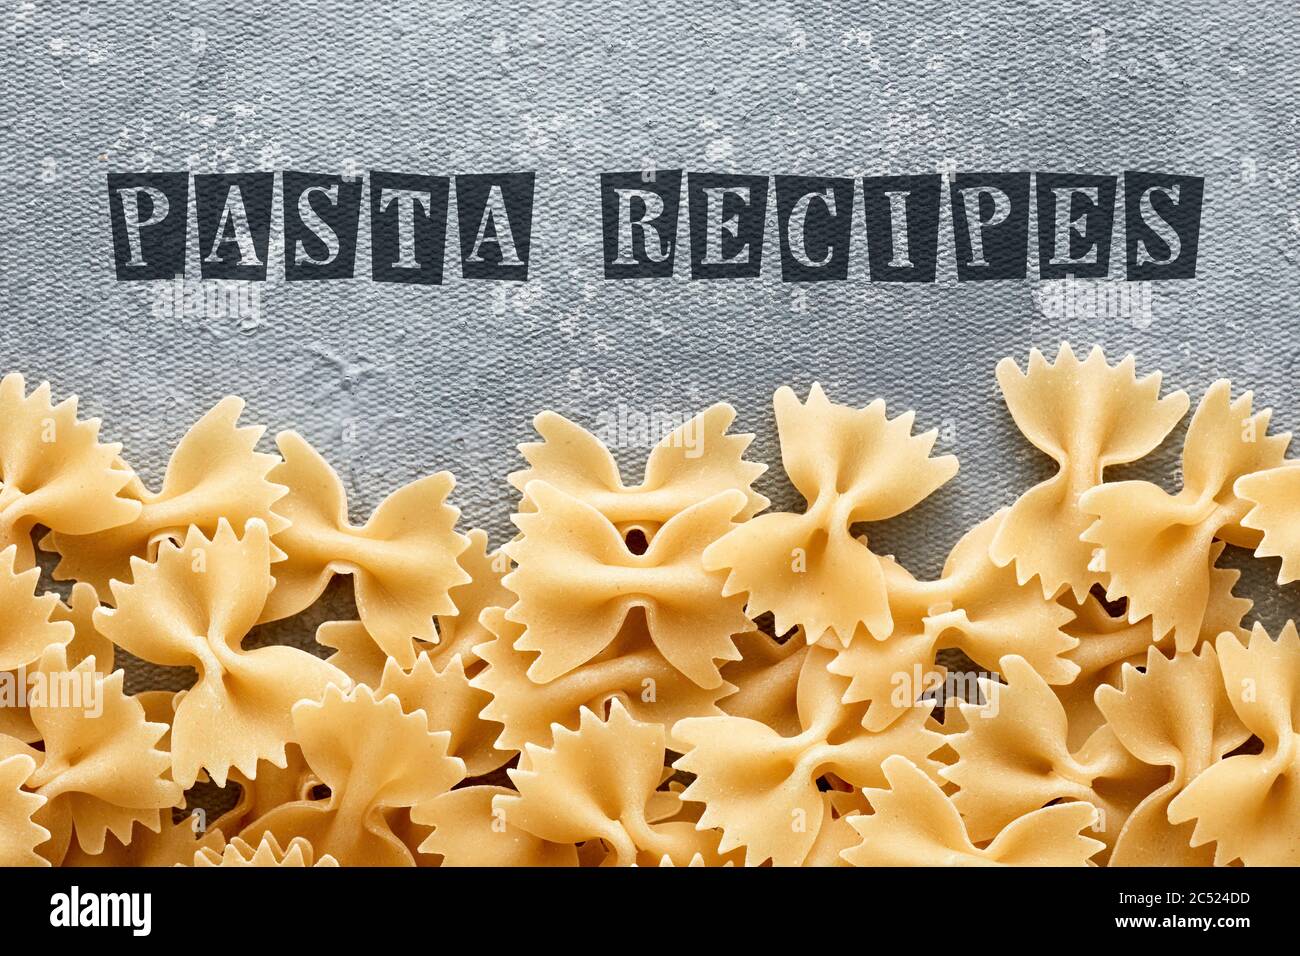 Template for pasta recipe with raw farfalle on textured gray background. Overhead view. Stock Photo